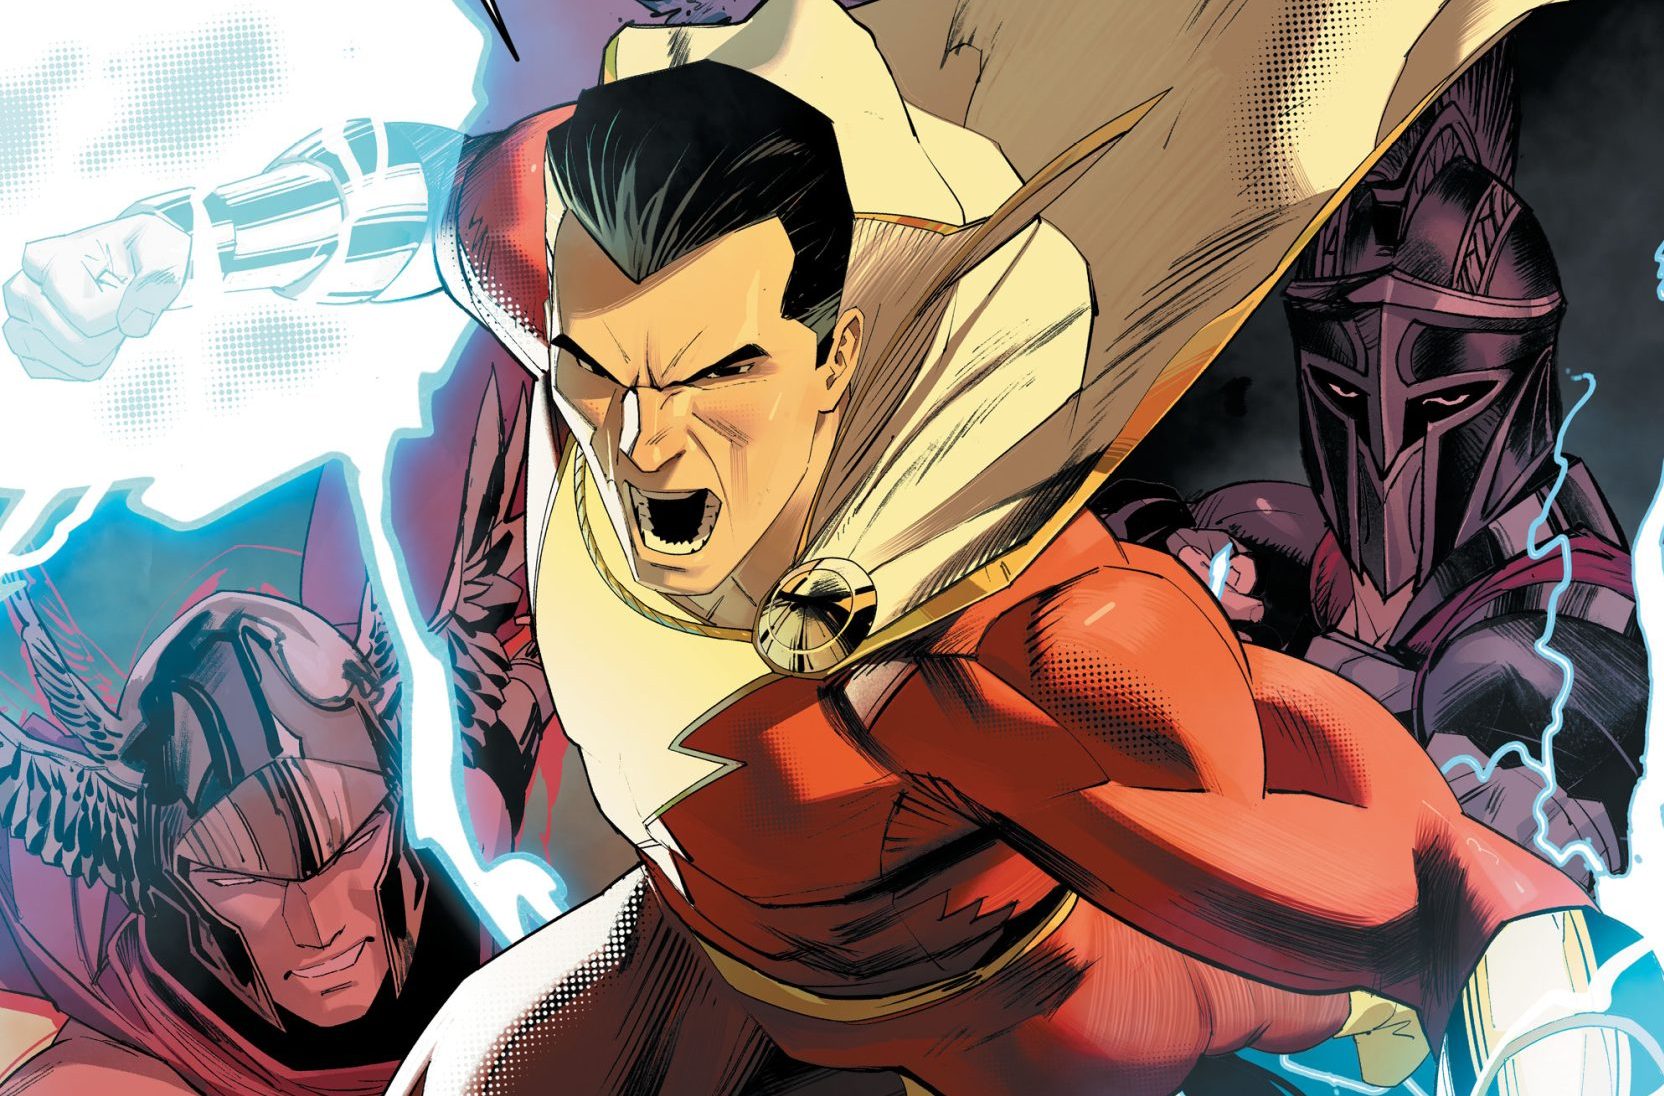 ‘Shazam!’ #6 pulls some clever and very effective tricks